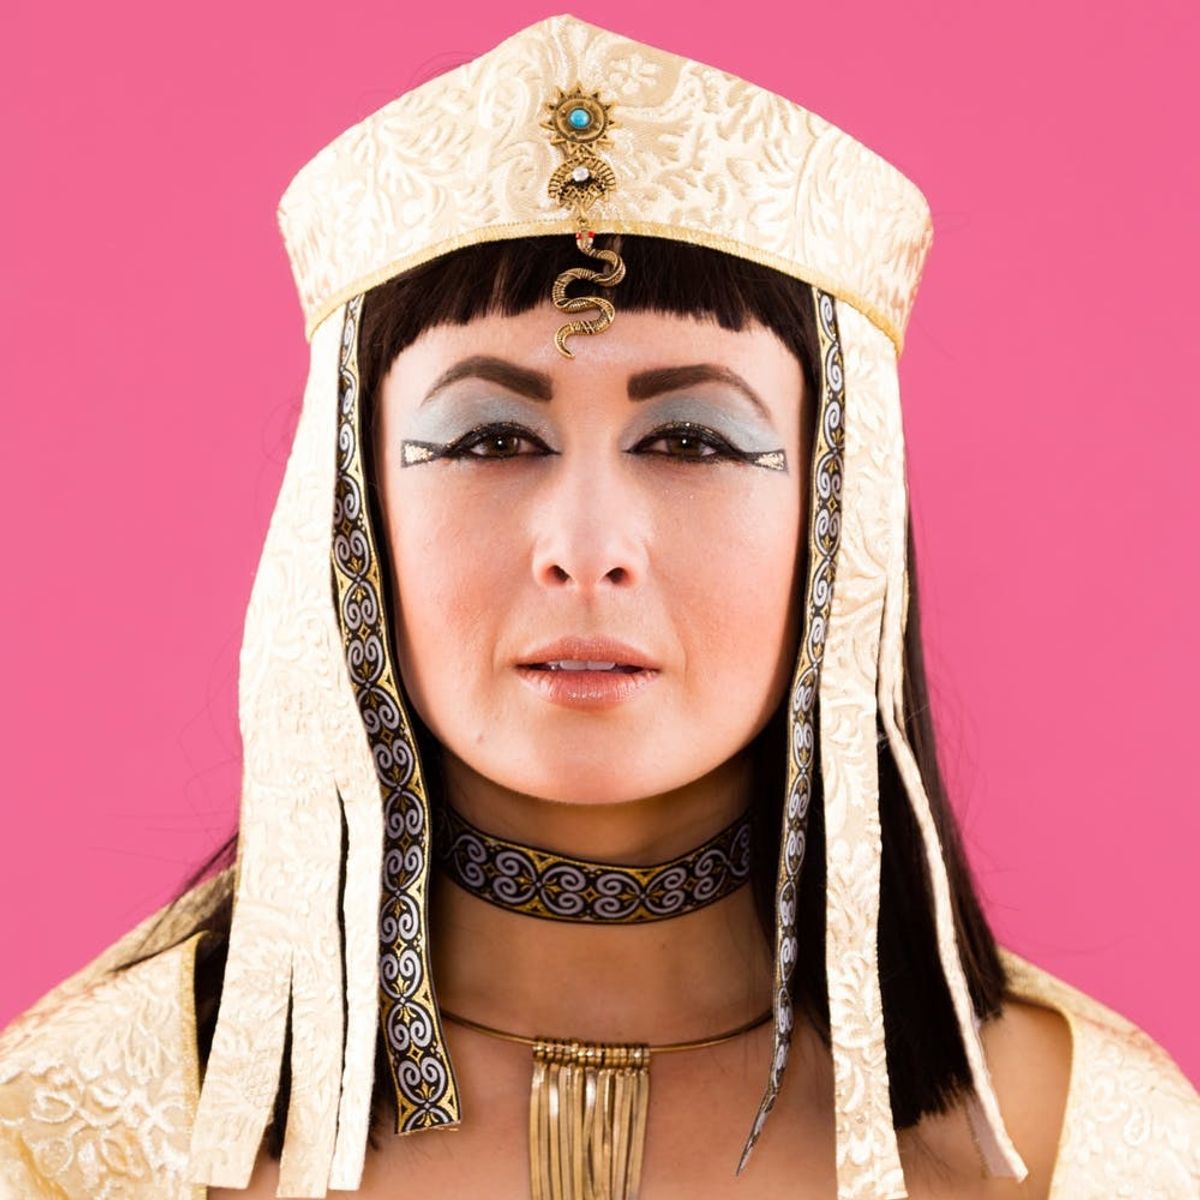 Get Your DIY Skills in Order — This Cleopatra Costume Is for the Advanced